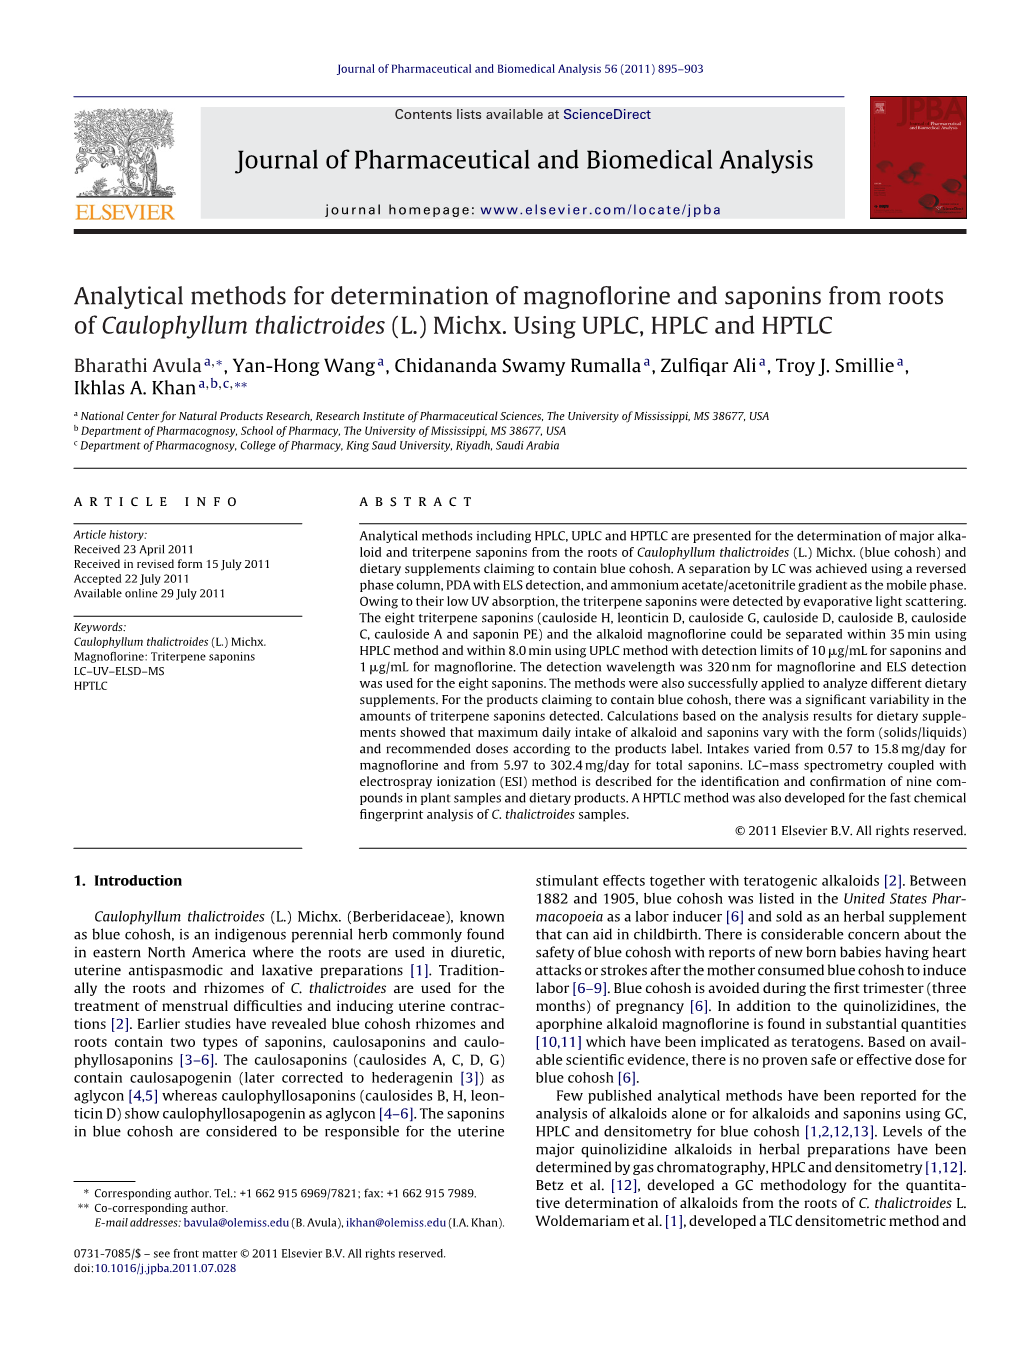 Analytical Methods for Determination of Magnoflorine and Saponins from Roots of Caulophyllum Thalictroides